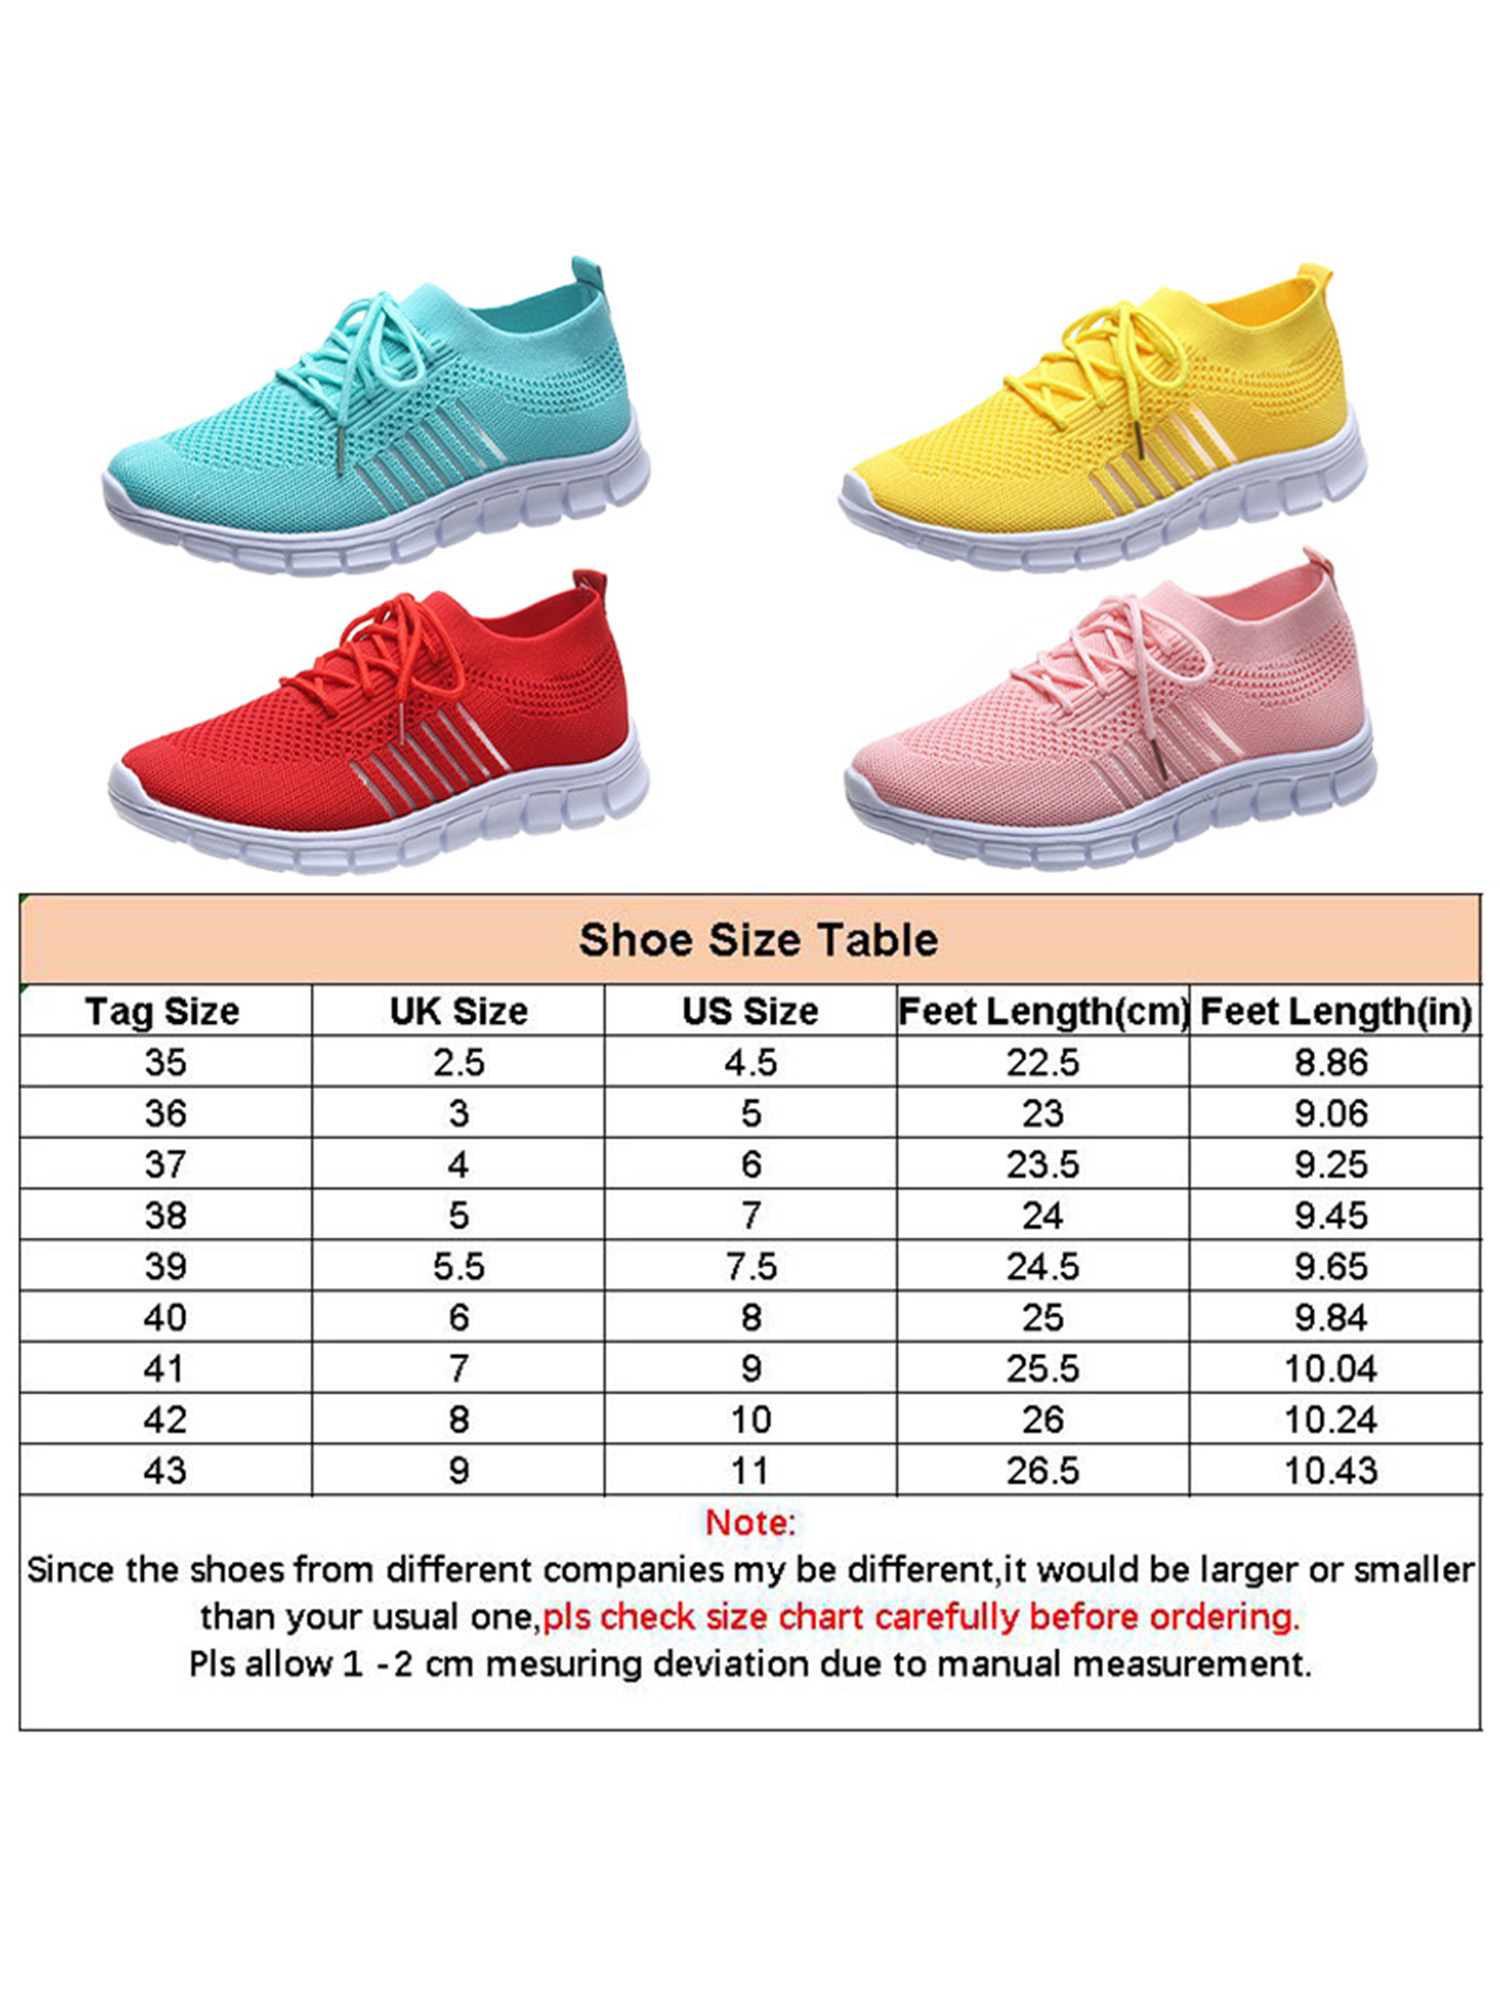 Crocowalk Womens Hiking Shoes Tennis Women Shoes Womens Mesh Walking Sneakers Athletic Running Trainers Breathable Casual Shoes - image 2 of 2